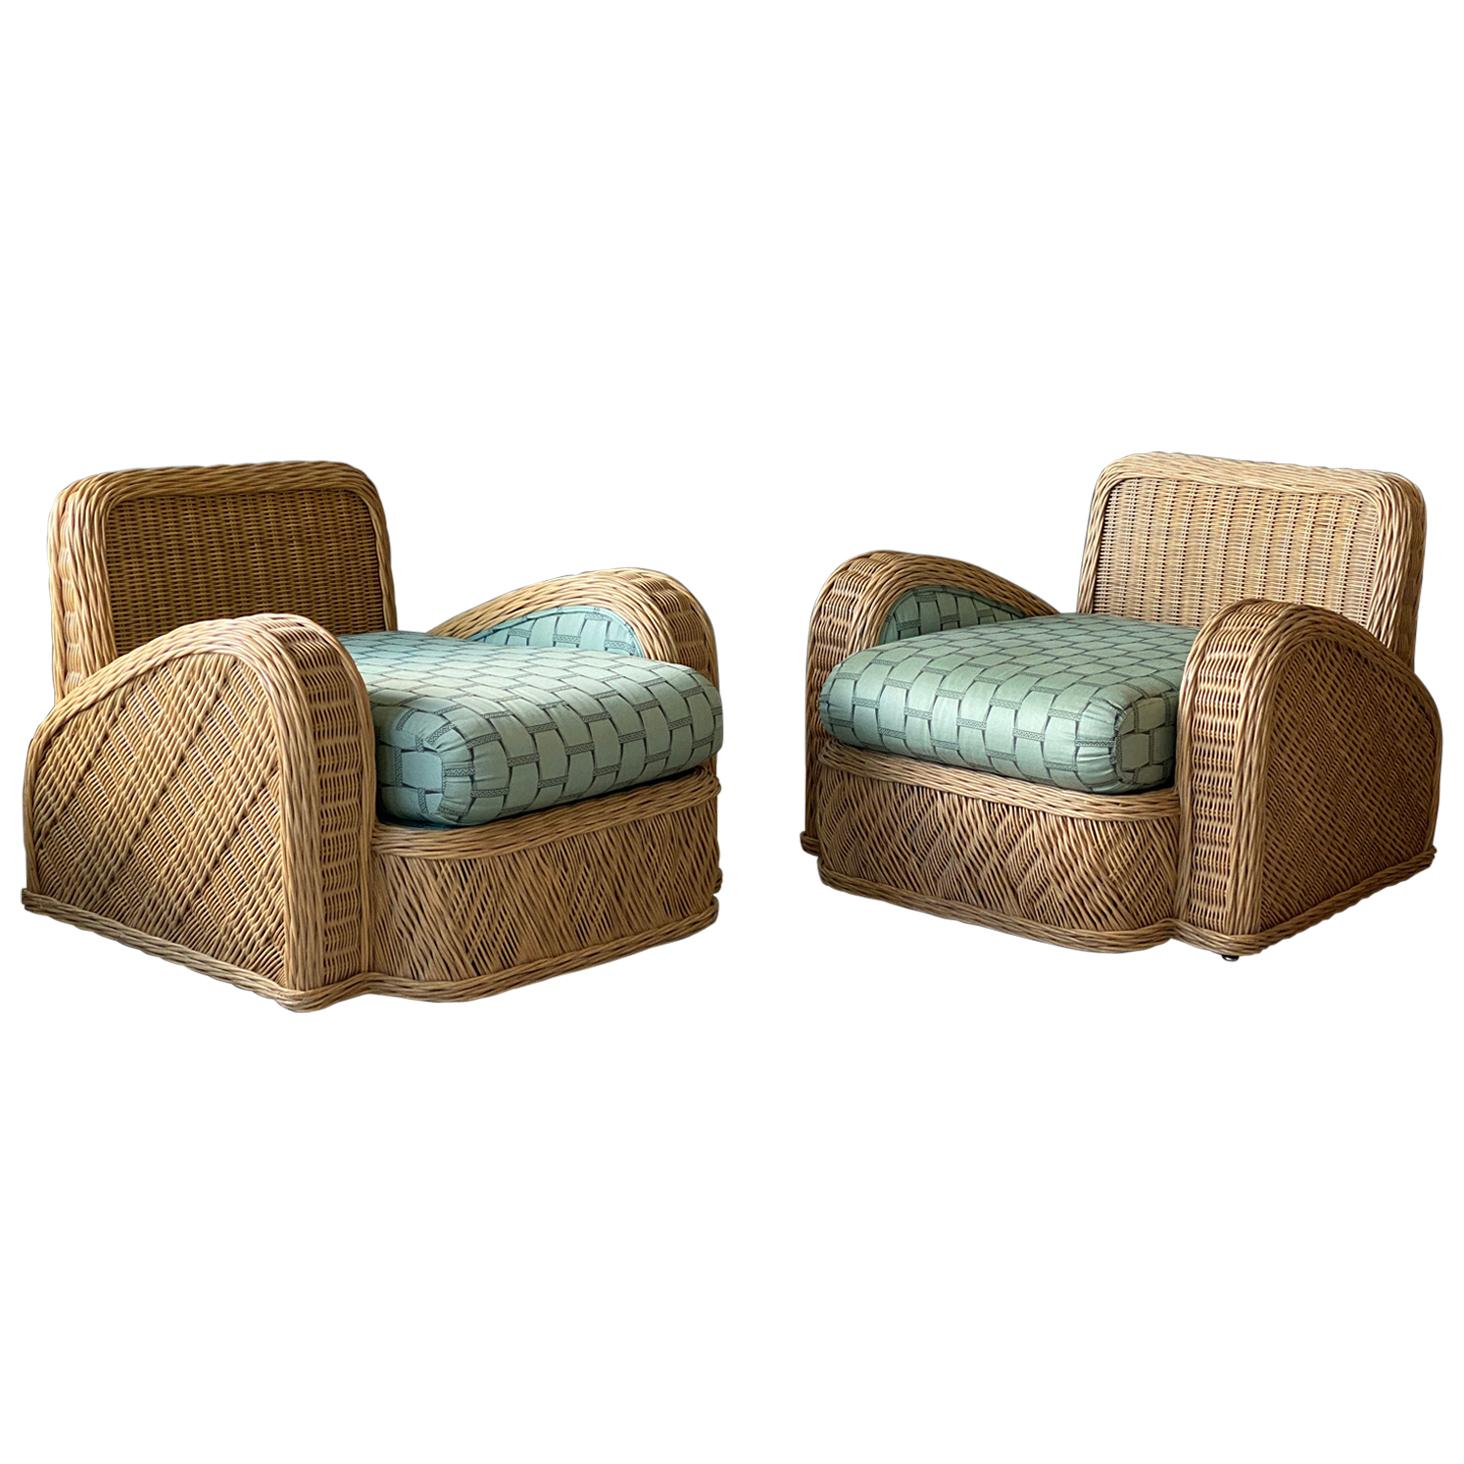 Jay Spectre, Lounge Chairs, Rattan / Wicker Fabric, Century United States, 1980s